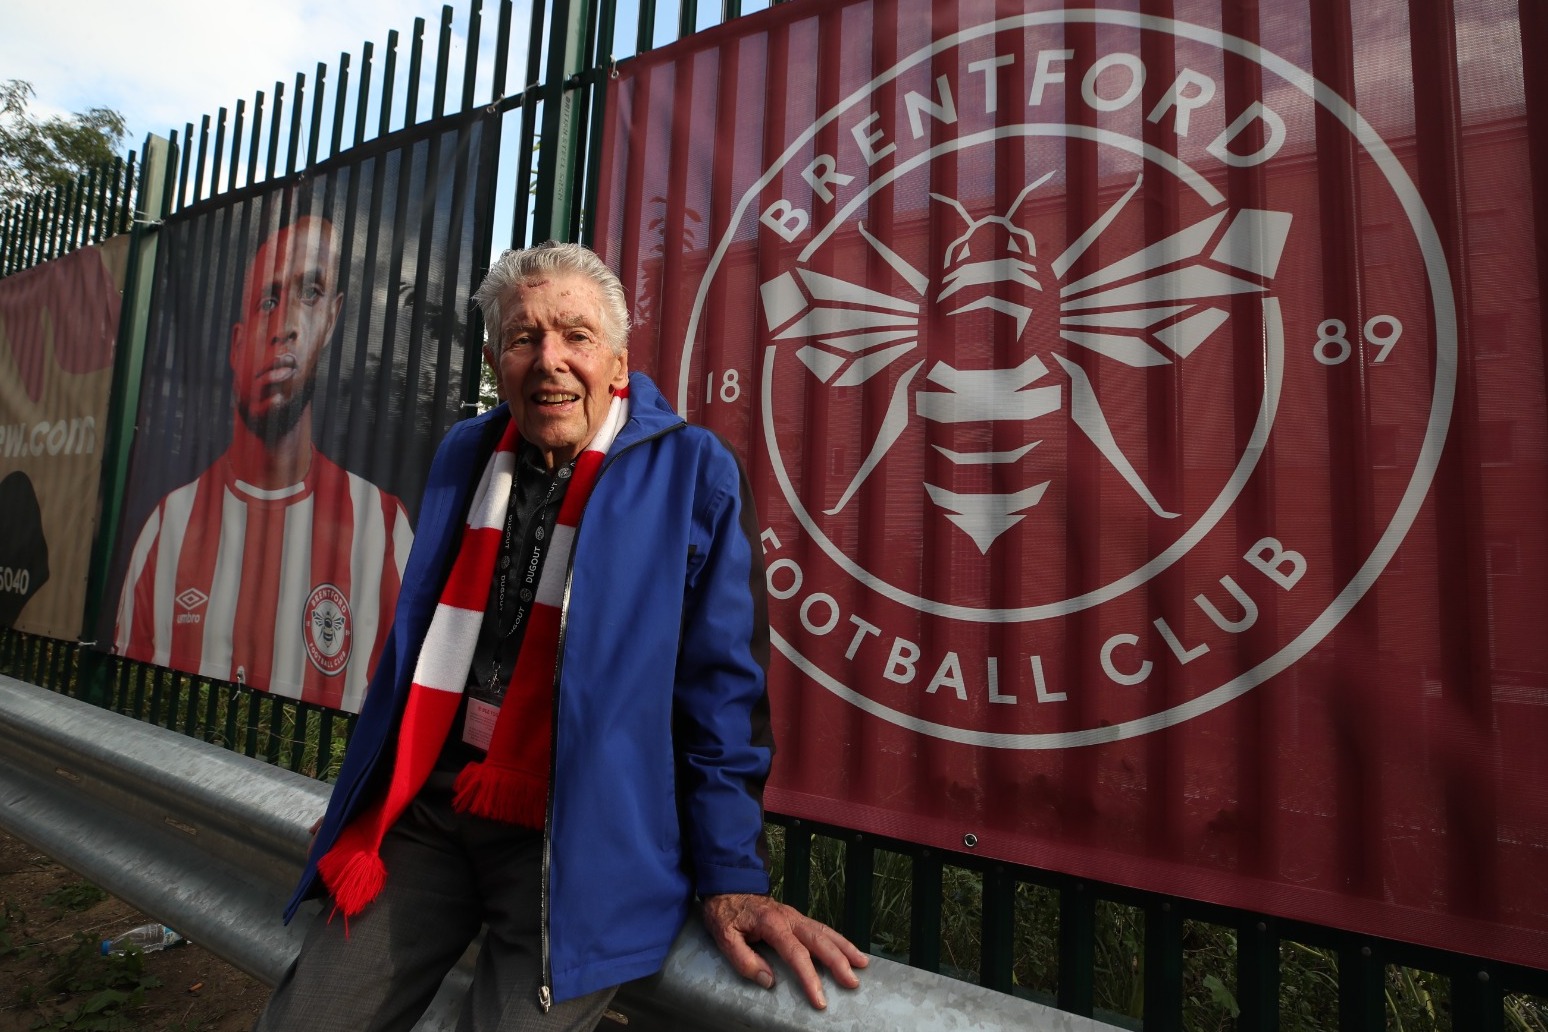 Brentford fan, 88, watches club play top flight football again after 74 years 